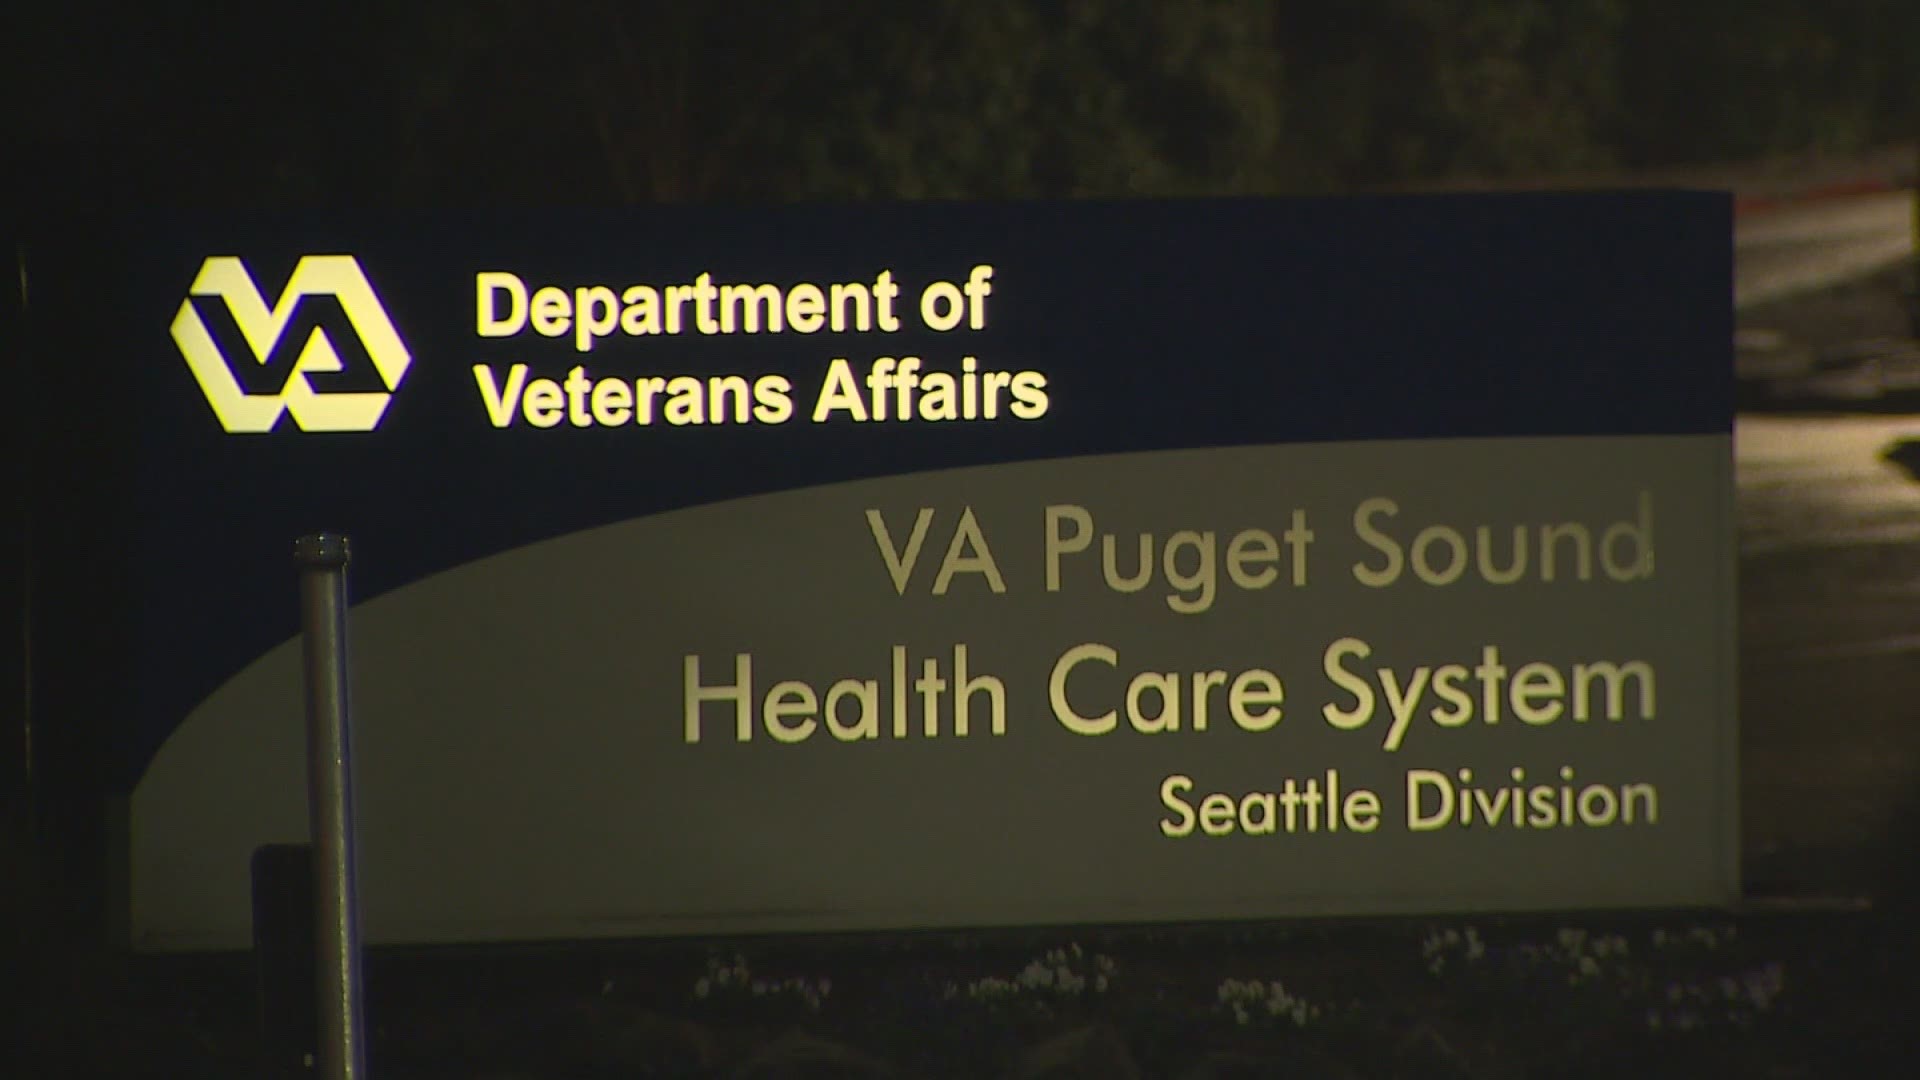 Veterans must already be receiving care from VA Puget Sound to be eligible.